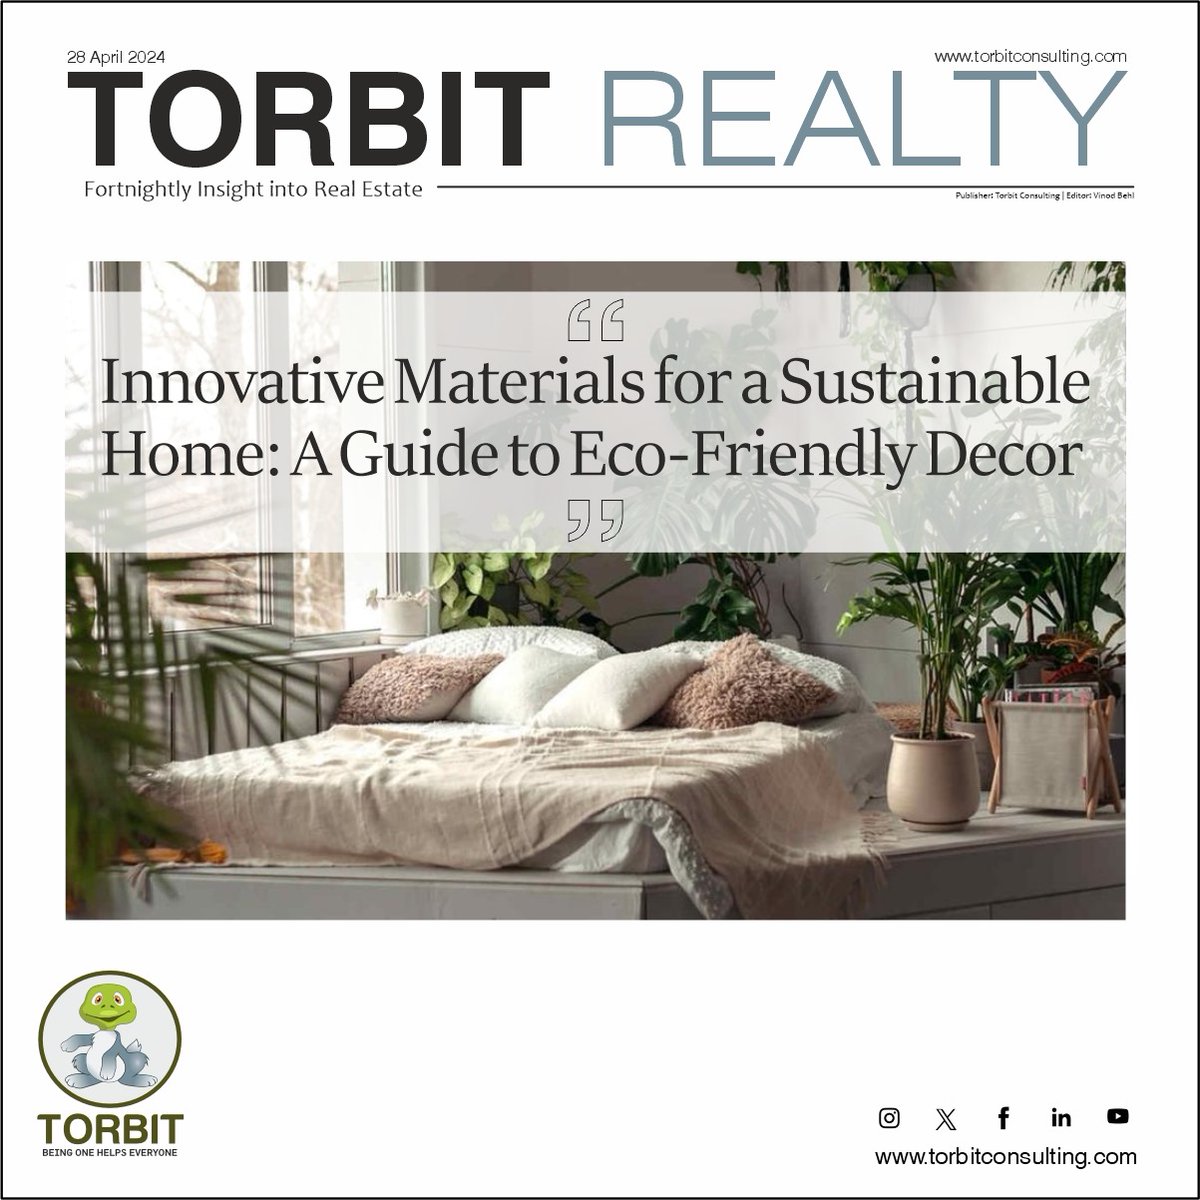 In today's era of thriving construction and high demand for smart and sustainable interior design, the wave of eco-friendly interior has become a popular property.

Read more: bit.ly/3VvNewr

#torbitproperty  #EcoFriendlyDecor  #HomiieStudio #sustainableliving #greenhome